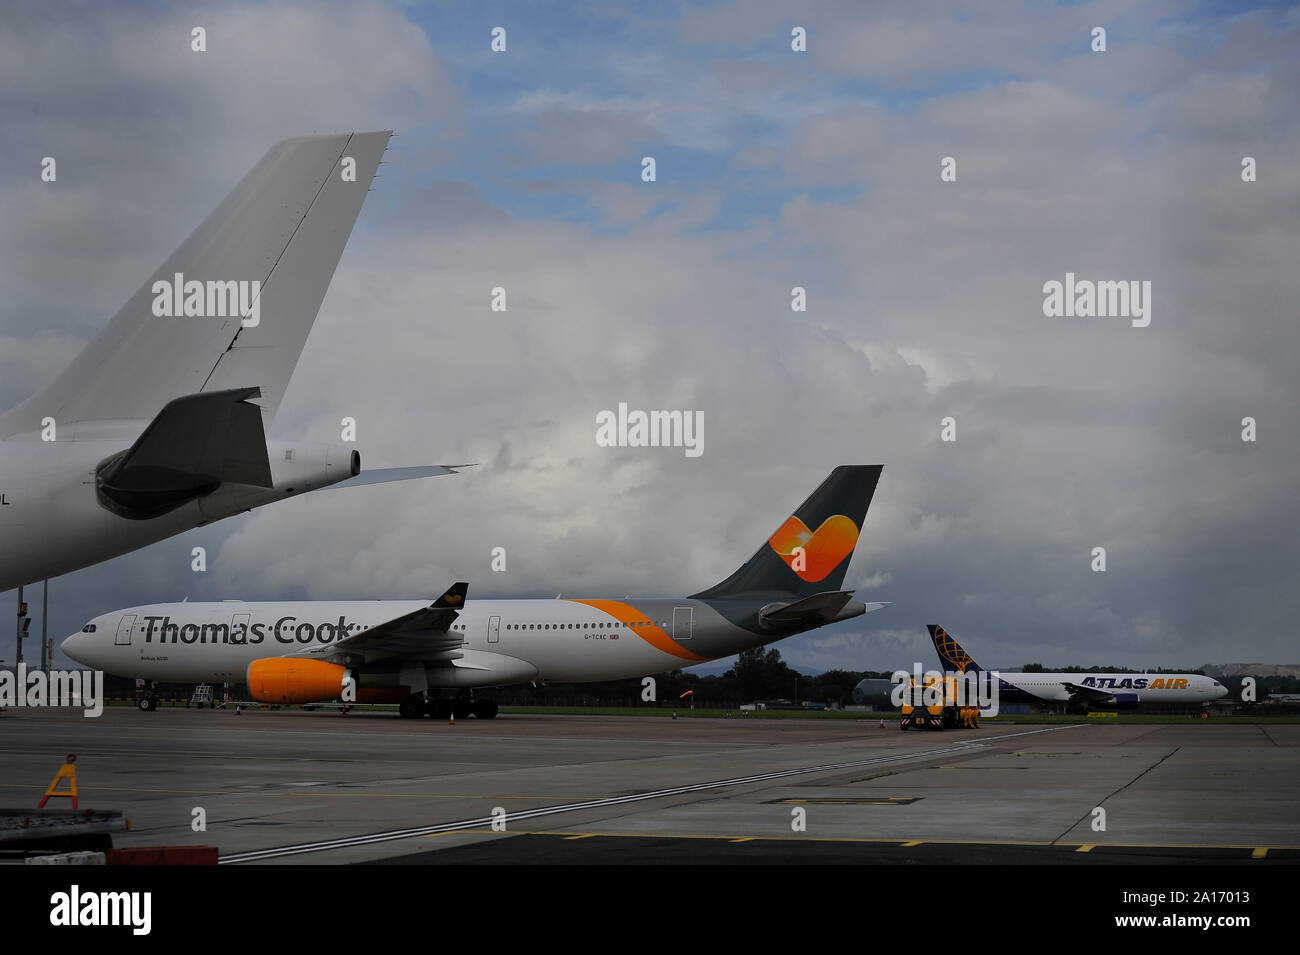 Glasgow, UK. 24 September 2019. PICTURED: An Airbus A330200 Aircraft stands empty and grounded on the tarmac at Glasgow International Airport.  Glasgow Airport Authority have placed 2 notices taped to the 2nd forward port side passenger door advising that the aircraft is grounded due to unpaid landing fees.  A huge snow plough stands underneath and behind the jet to prevent the aircraft from being pushed back from its position. Colin Fisher/Alamy Live News Credit: Colin Fisher/Alamy Live News Stock Photo